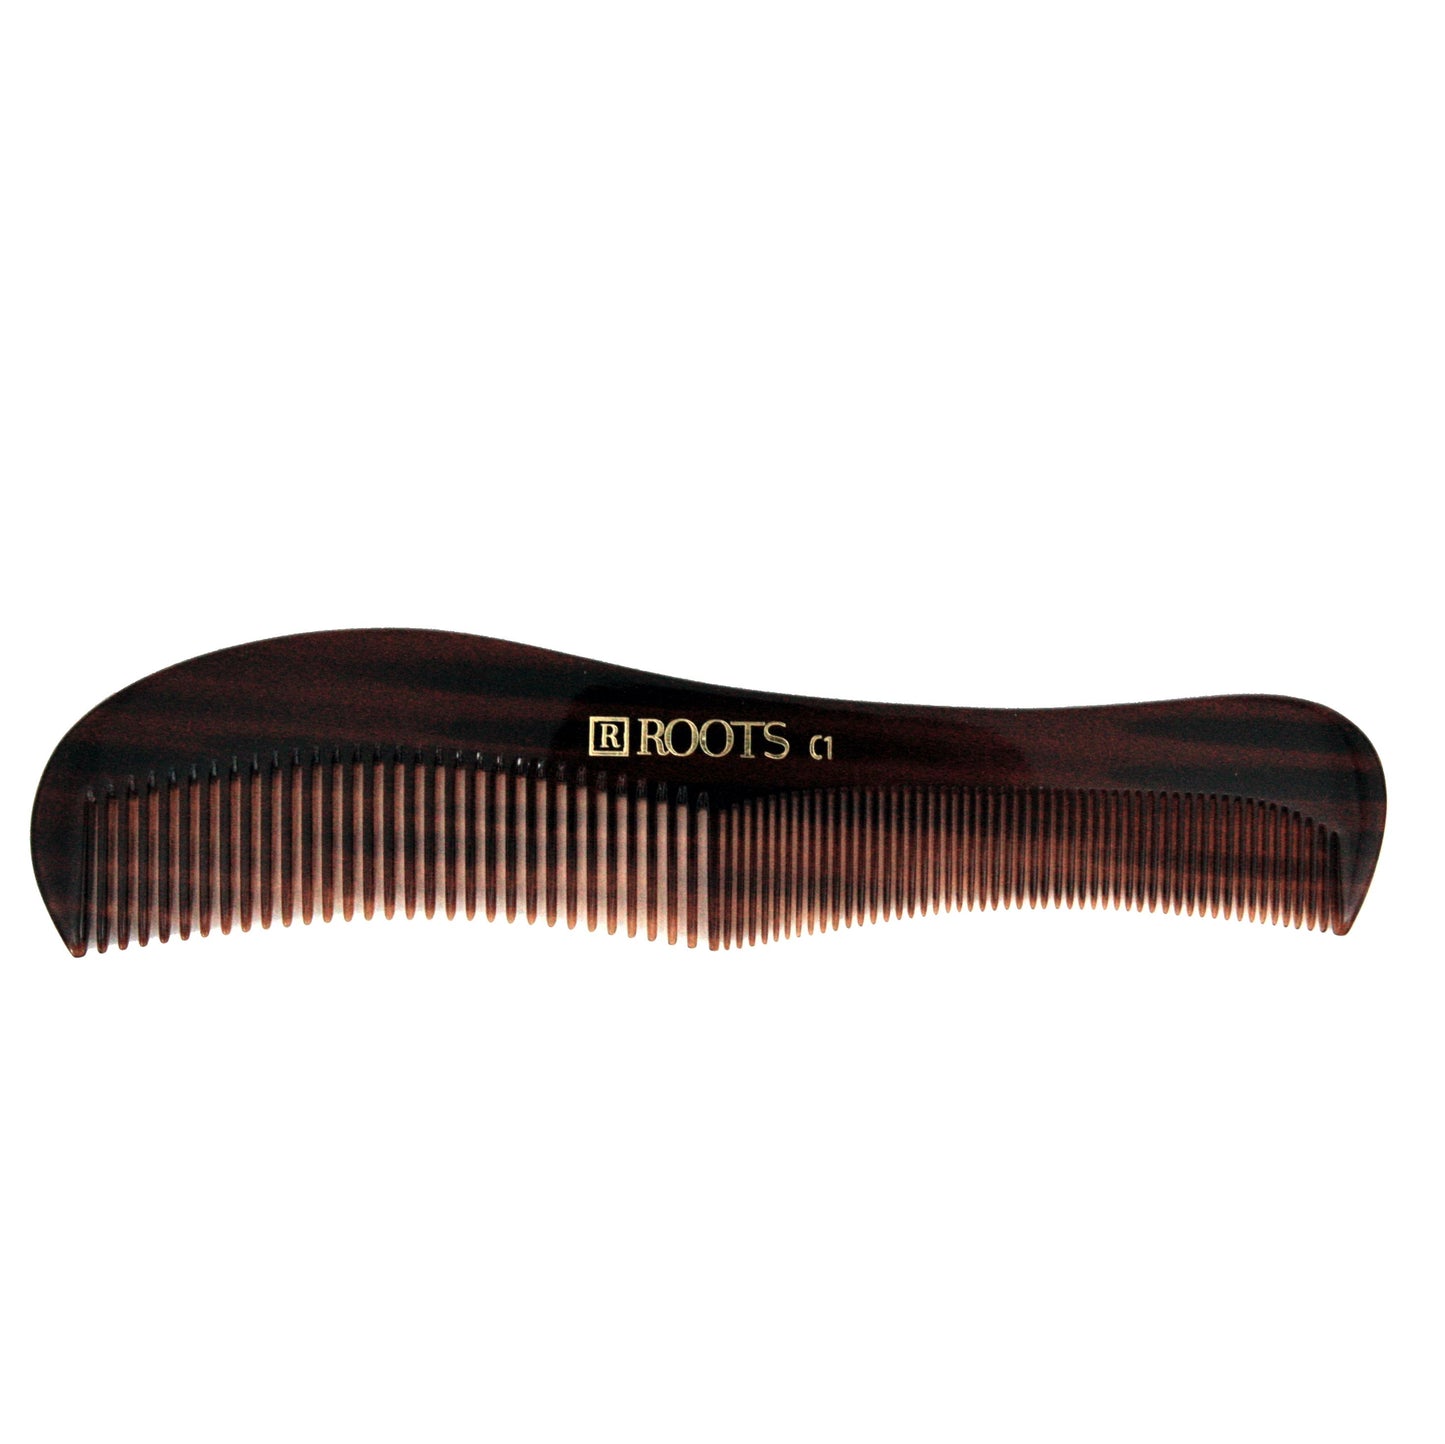 8.375in Roots C1 Cellulose Acetate Curved Styling Comb - Clearance